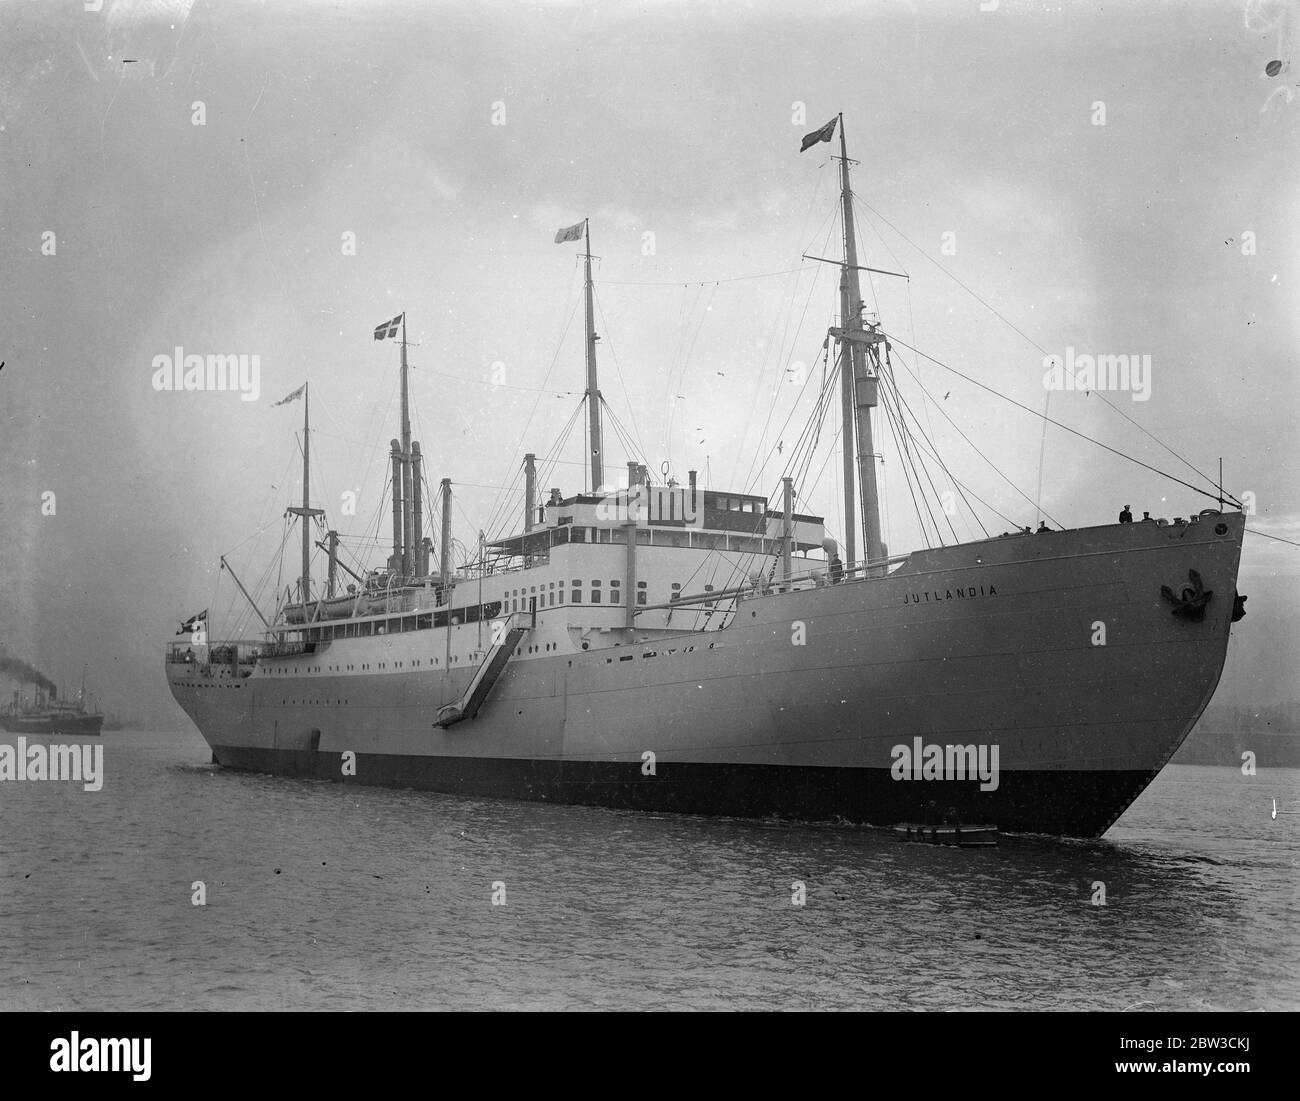 The Danish ship , Jutlandia on the Thames at Tilbury which carried the ...